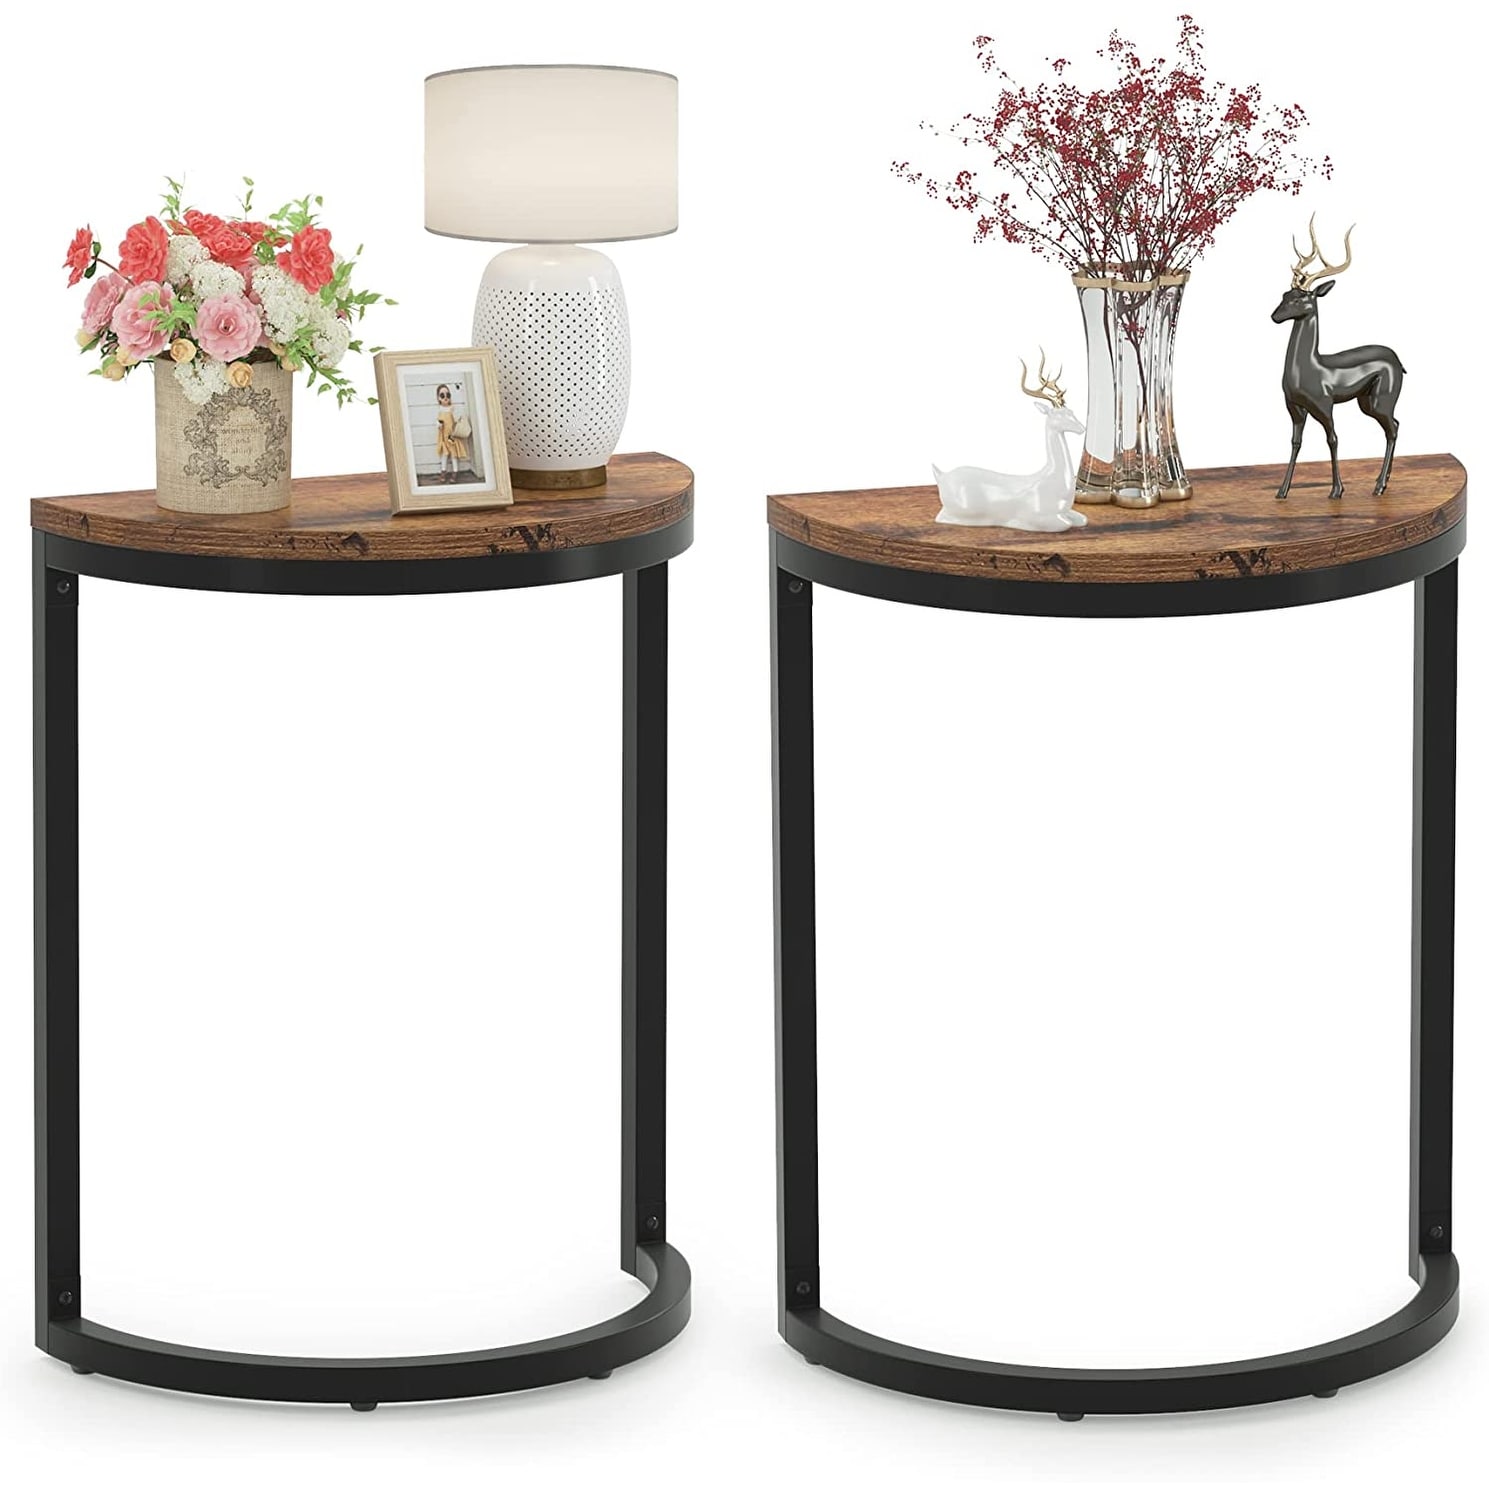 Narrow End Table Half Round with Metal Frame, Slim C Table